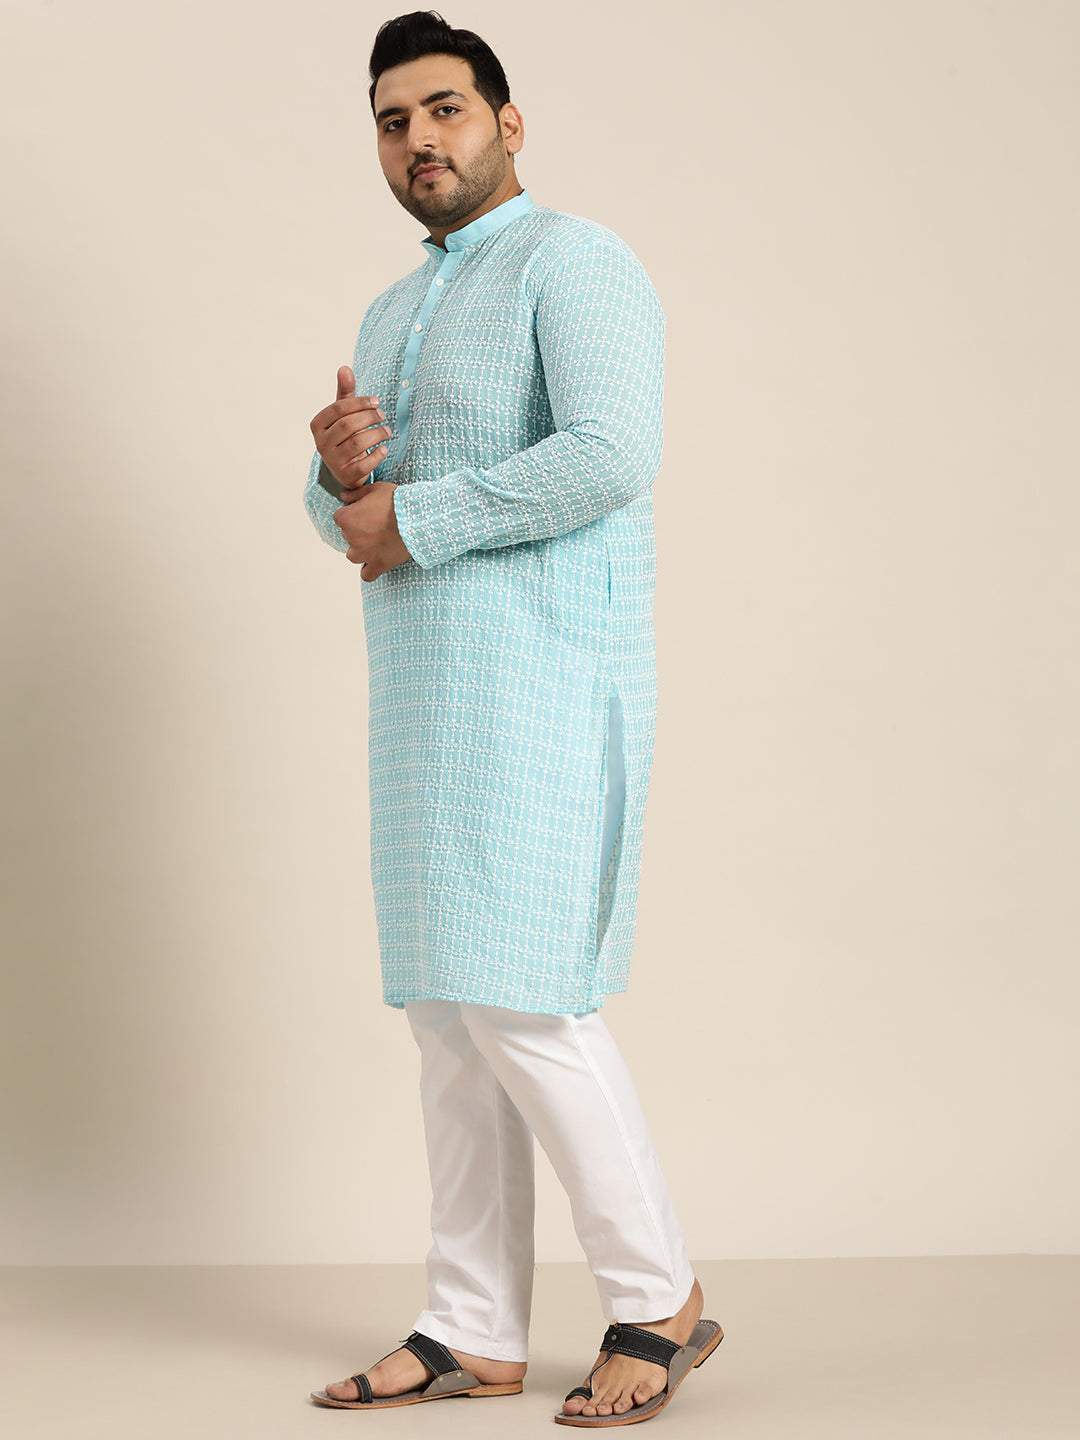 Men's Pure Cotton Blue Kurta with White Embroidery